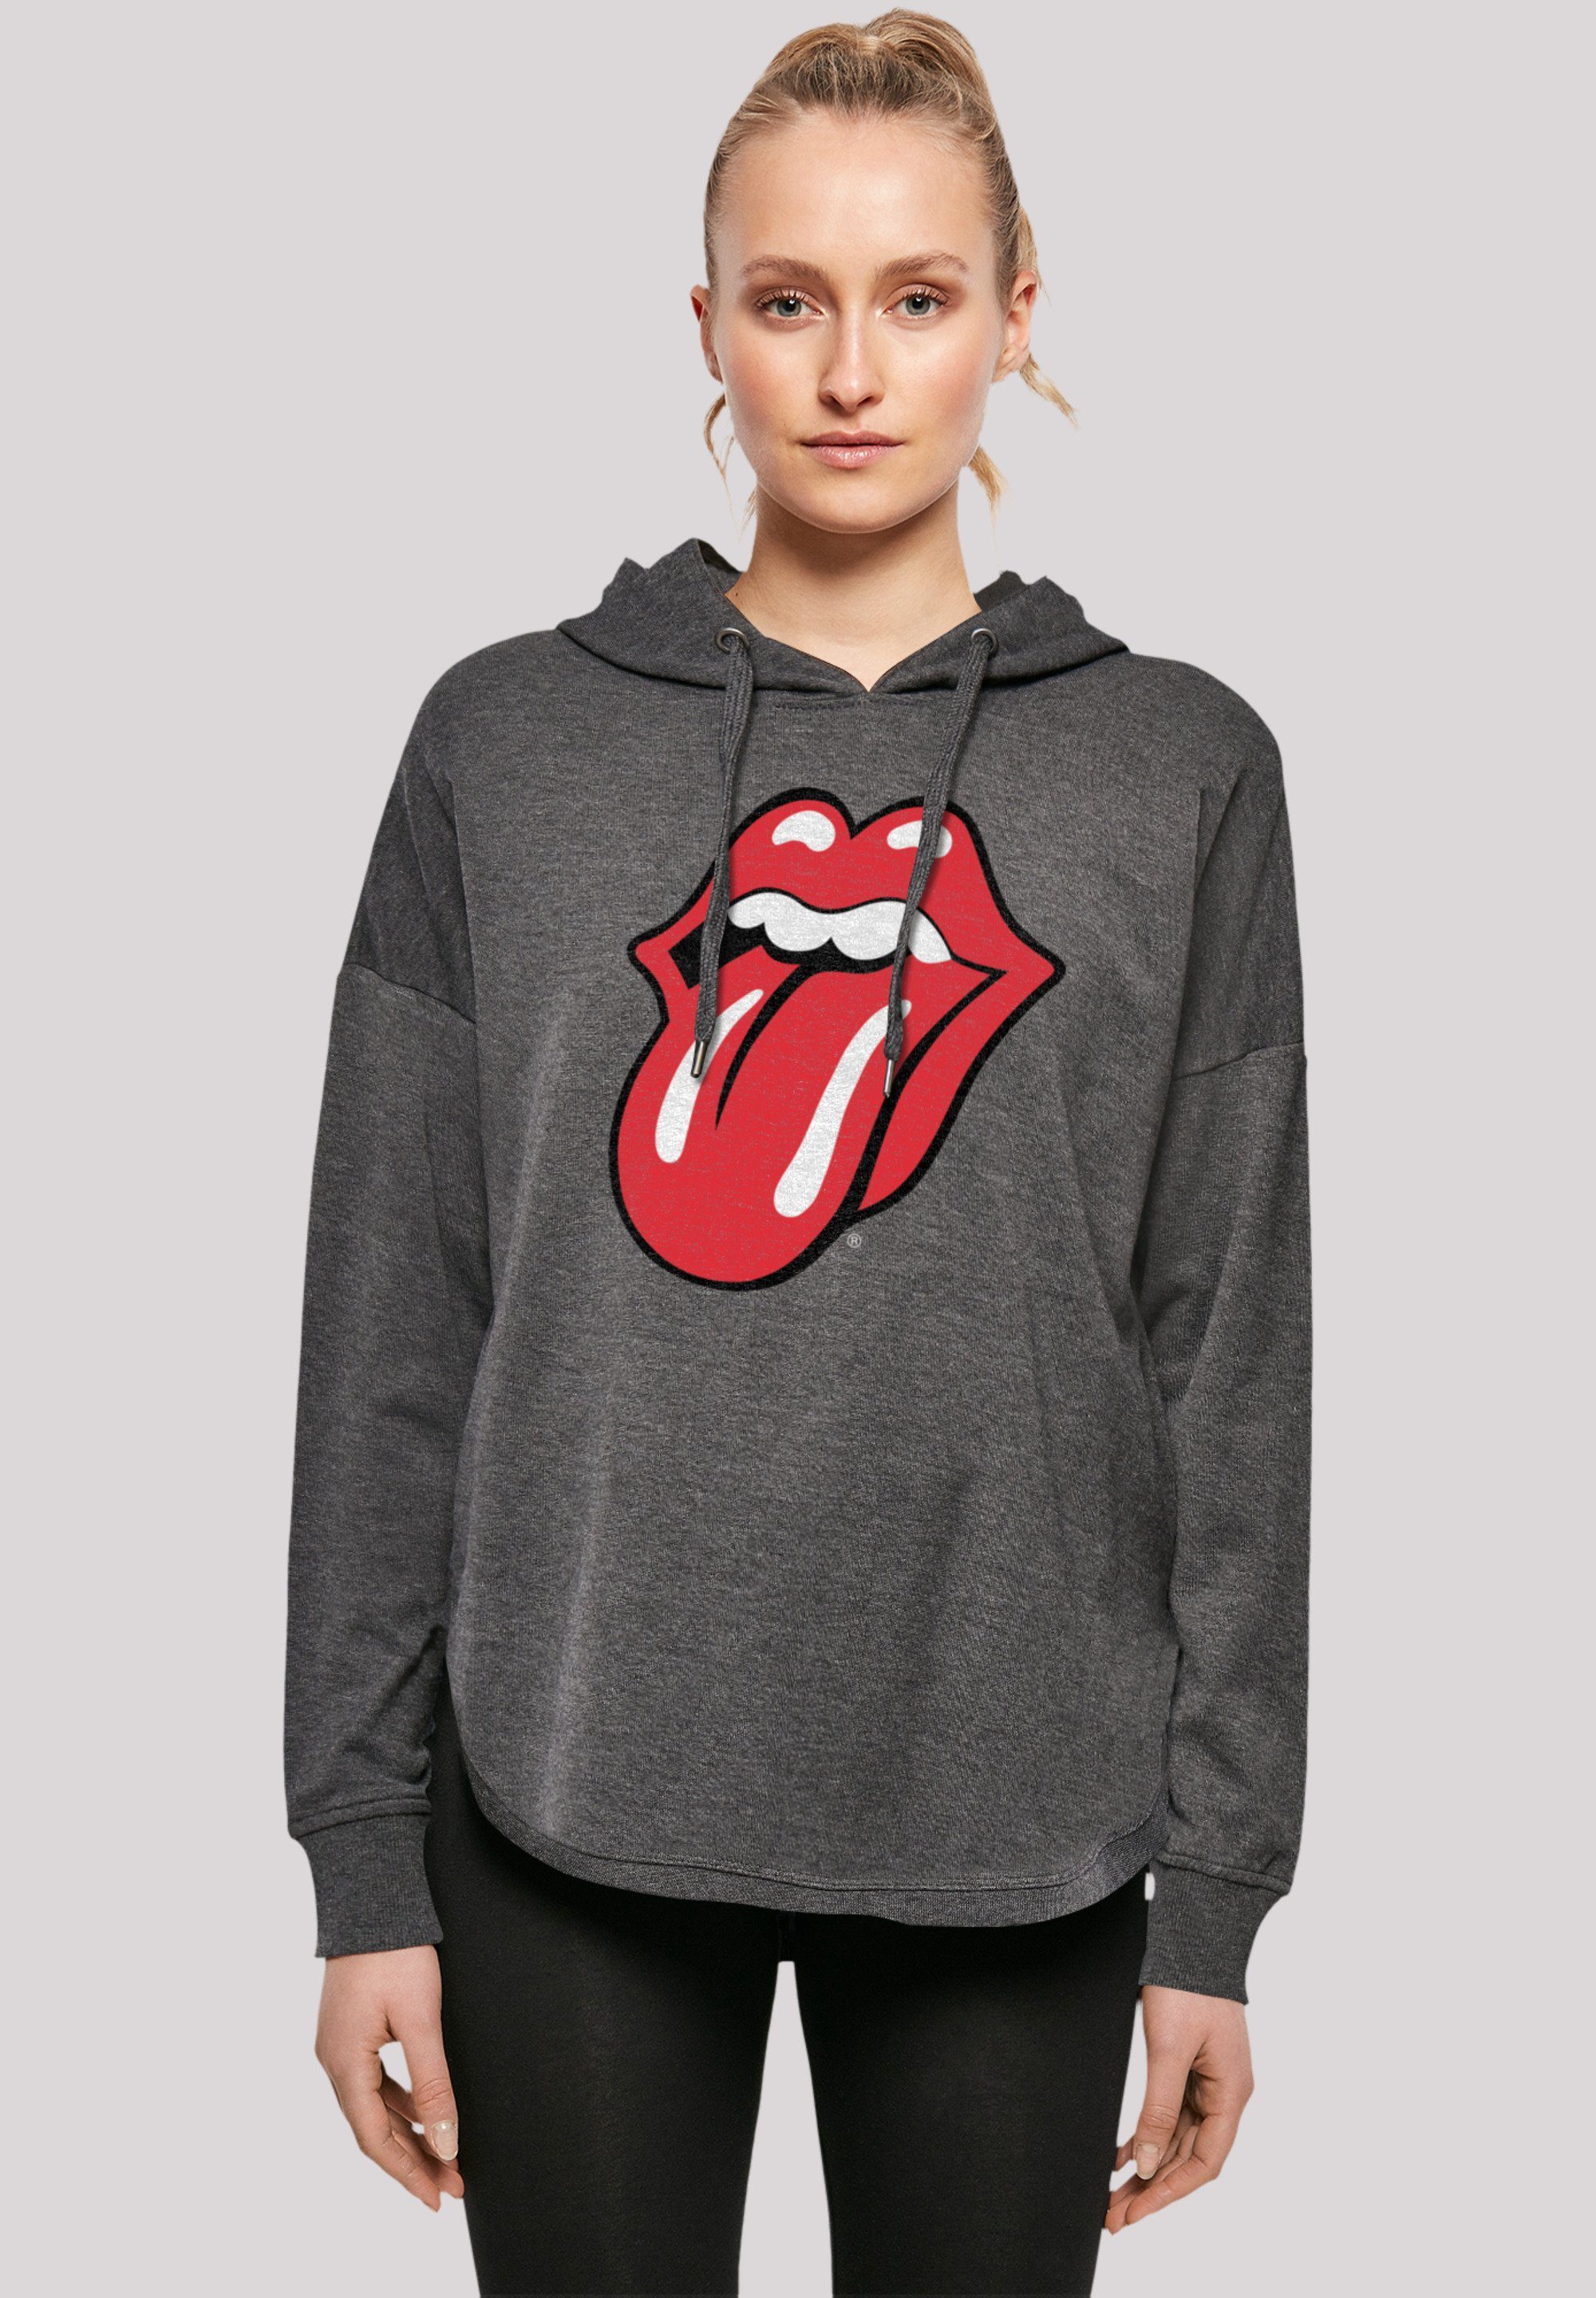 F4NT4STIC Kapuzenpullover The Rolling Stones Zunge Rot Print charcoal